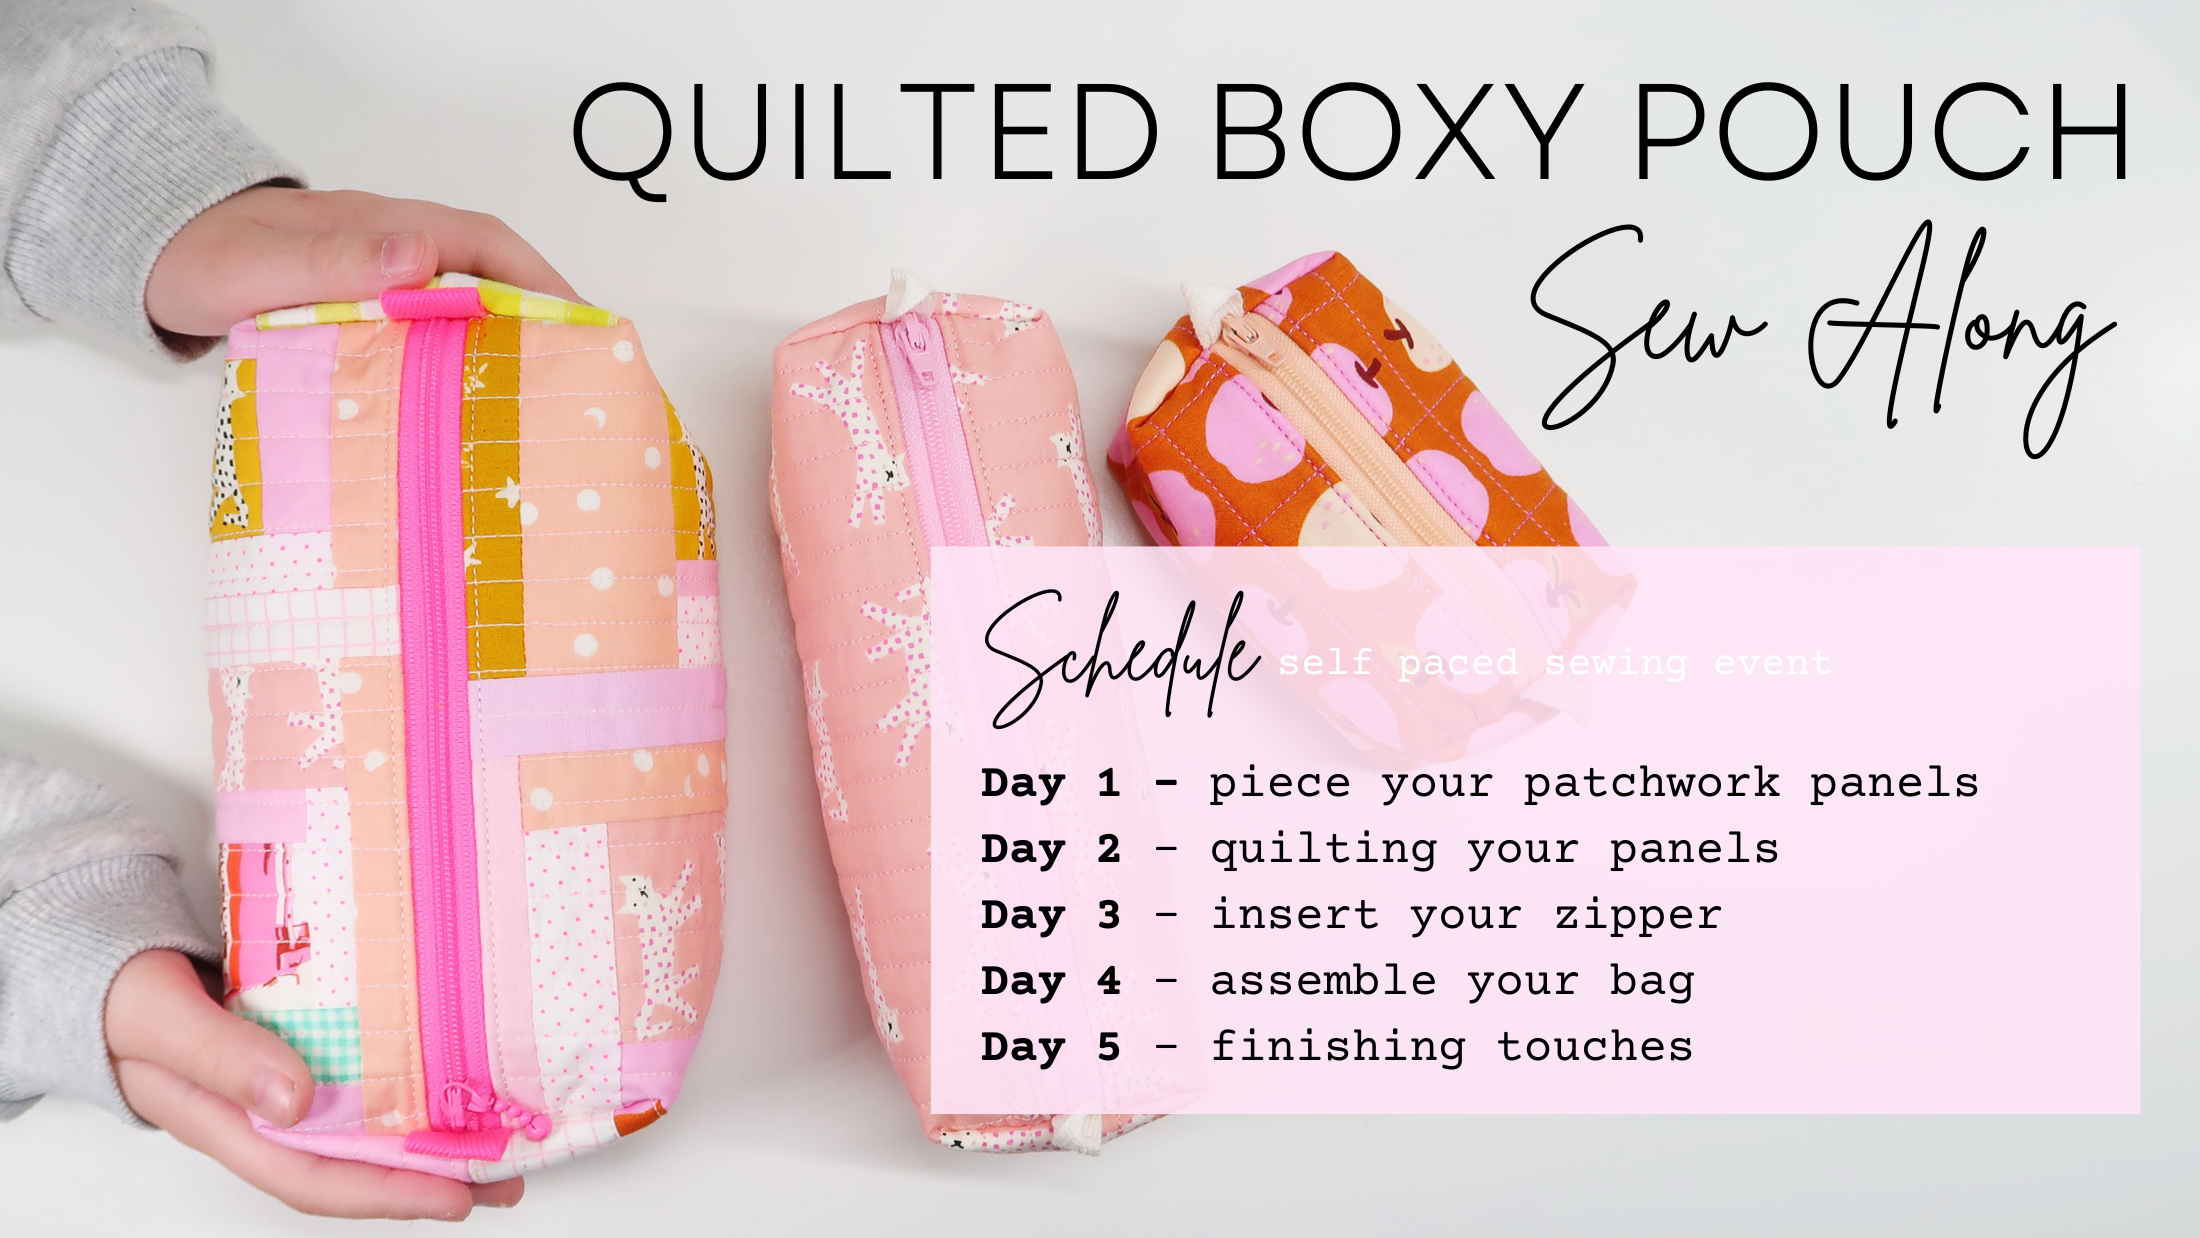 Quilted Boxy Pouch Sew Along self paced